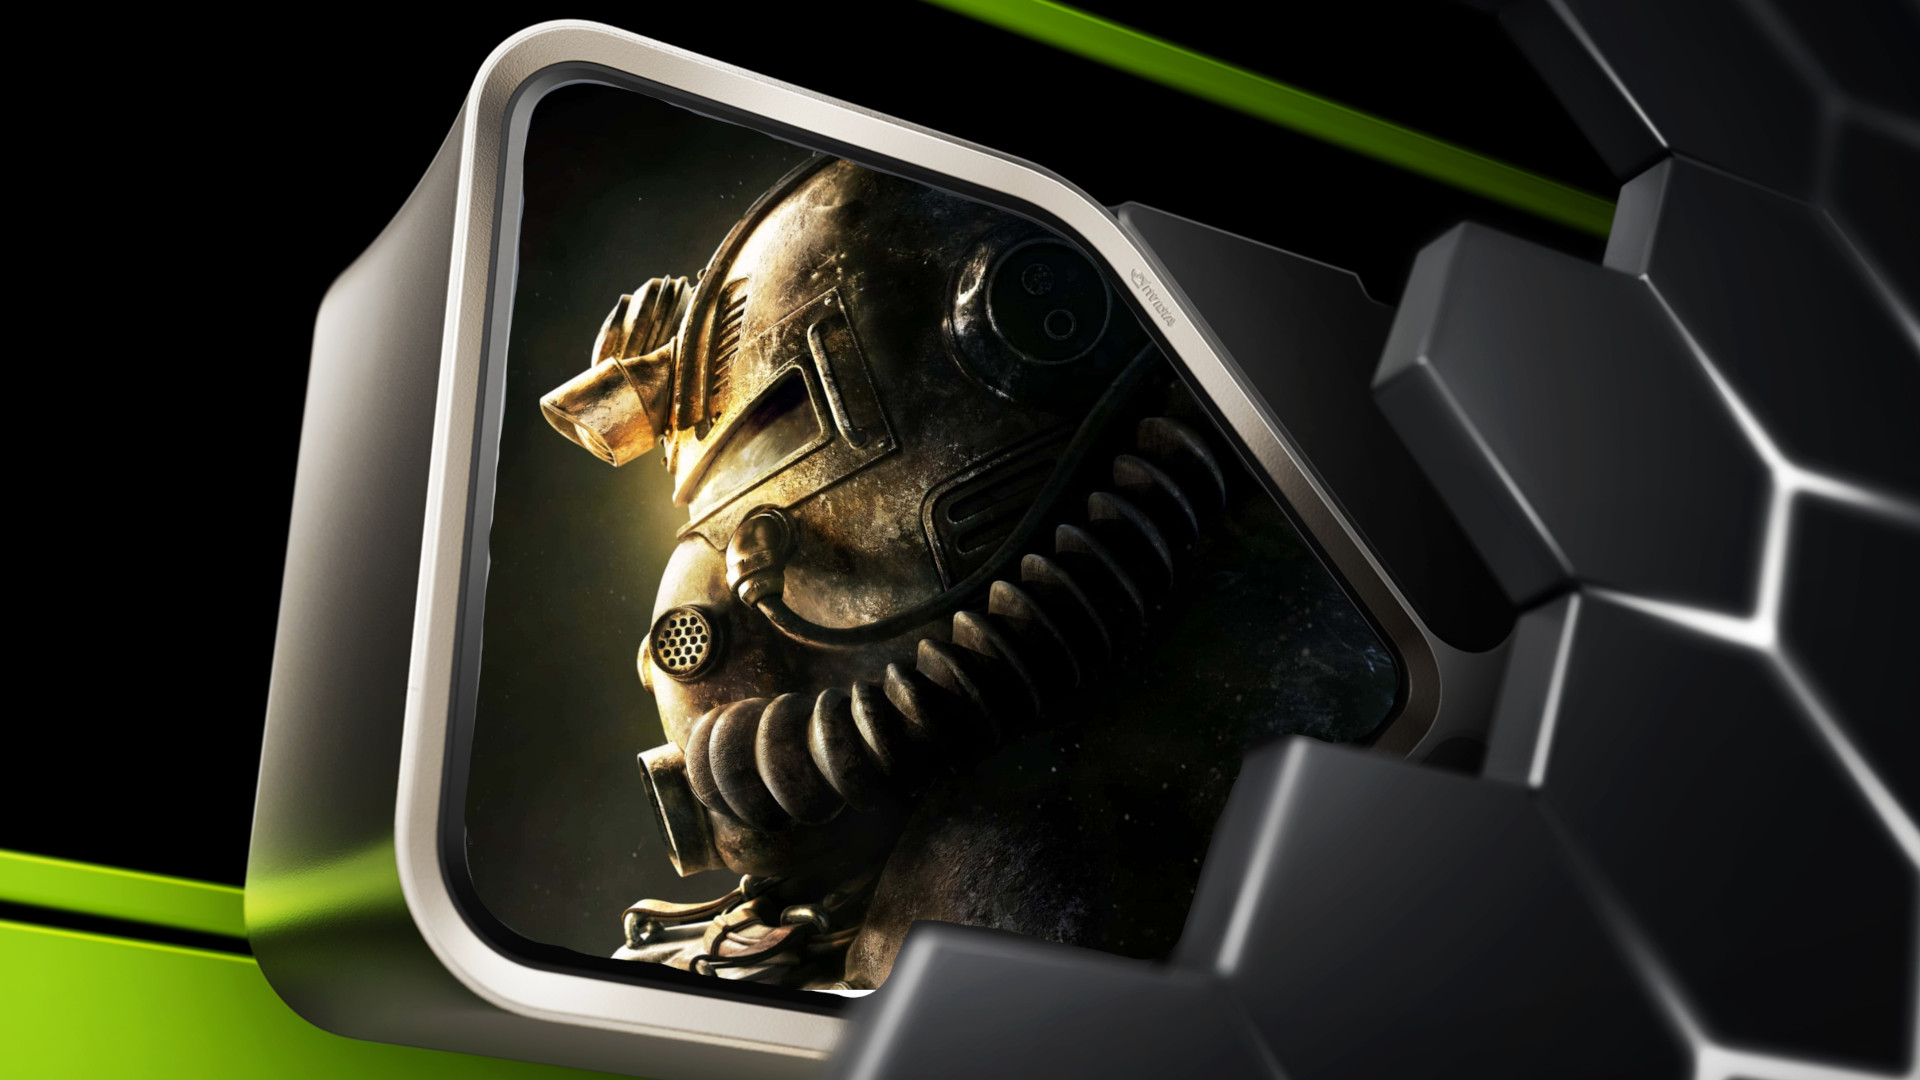 Fallout returns to Nvidia GeForce Now, just in time for TV show